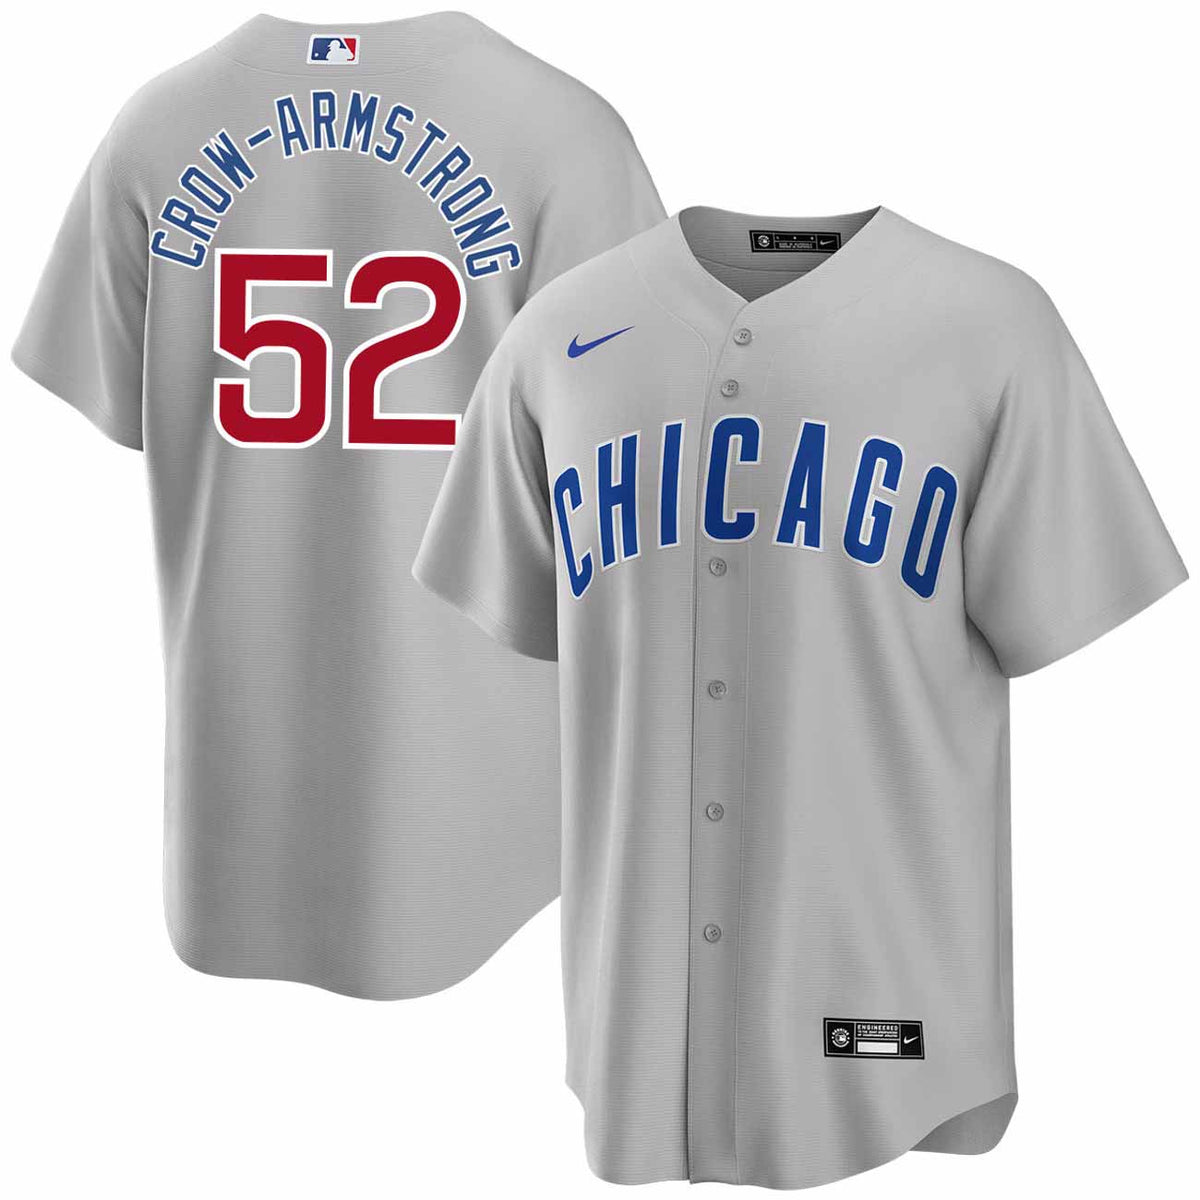 Chicago Cubs Pete Crow-Armstrong Youth Nike Home Replica Jersey